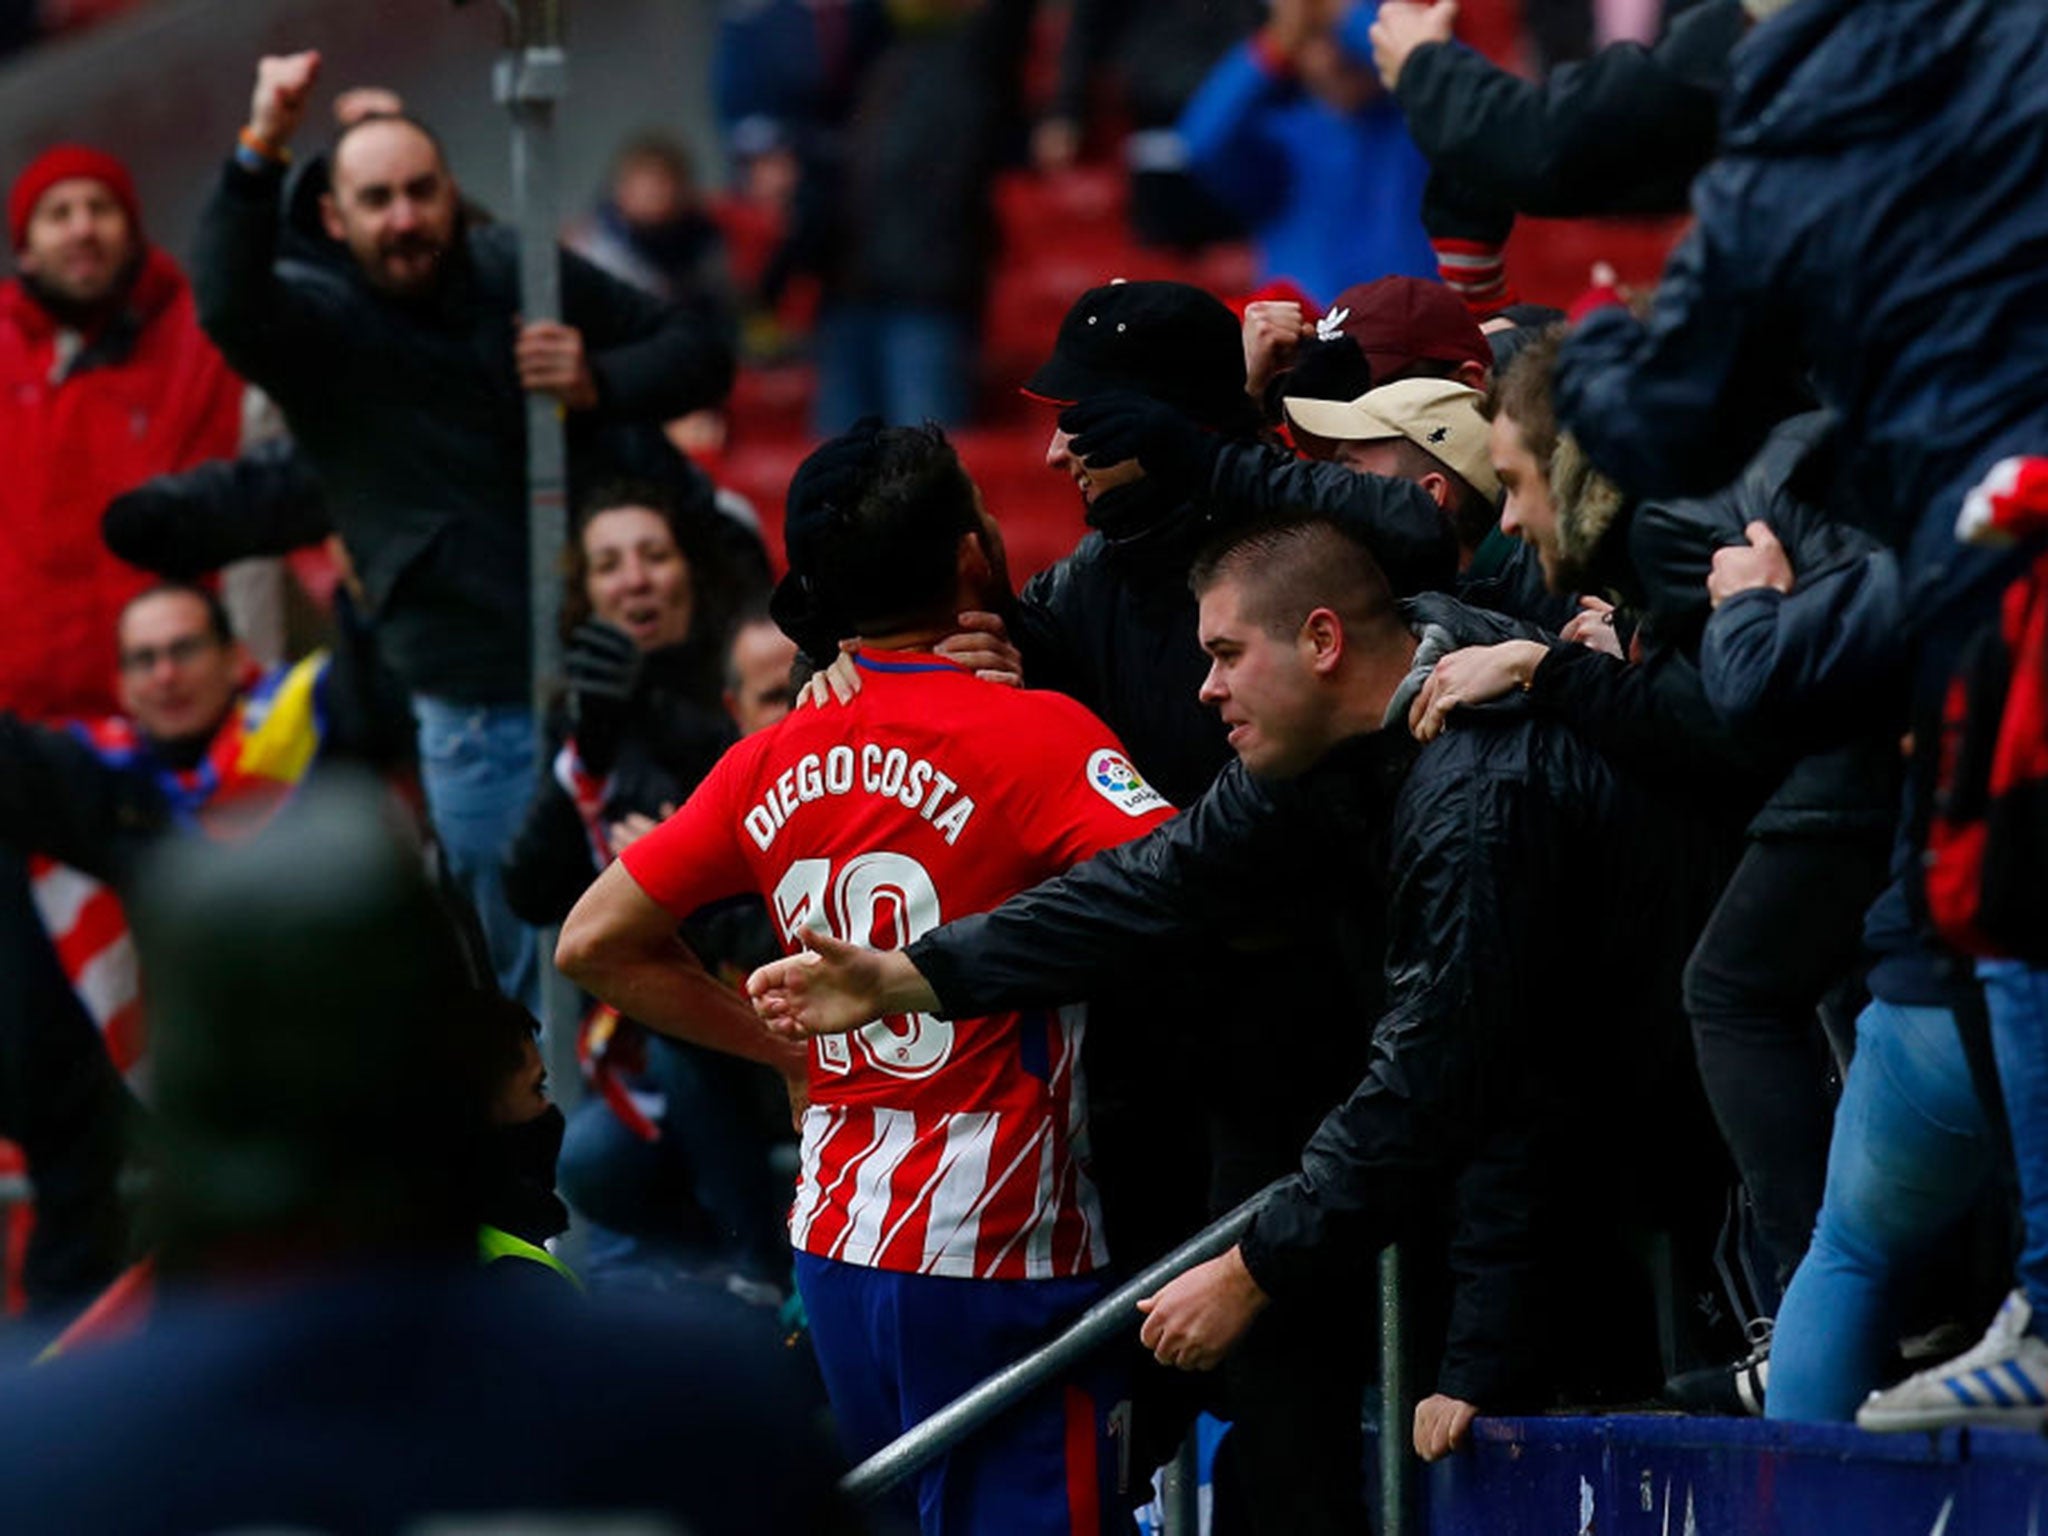 &#13;
Costa is embraced by Atleti fans after scoring on his return. (Getty )&#13;